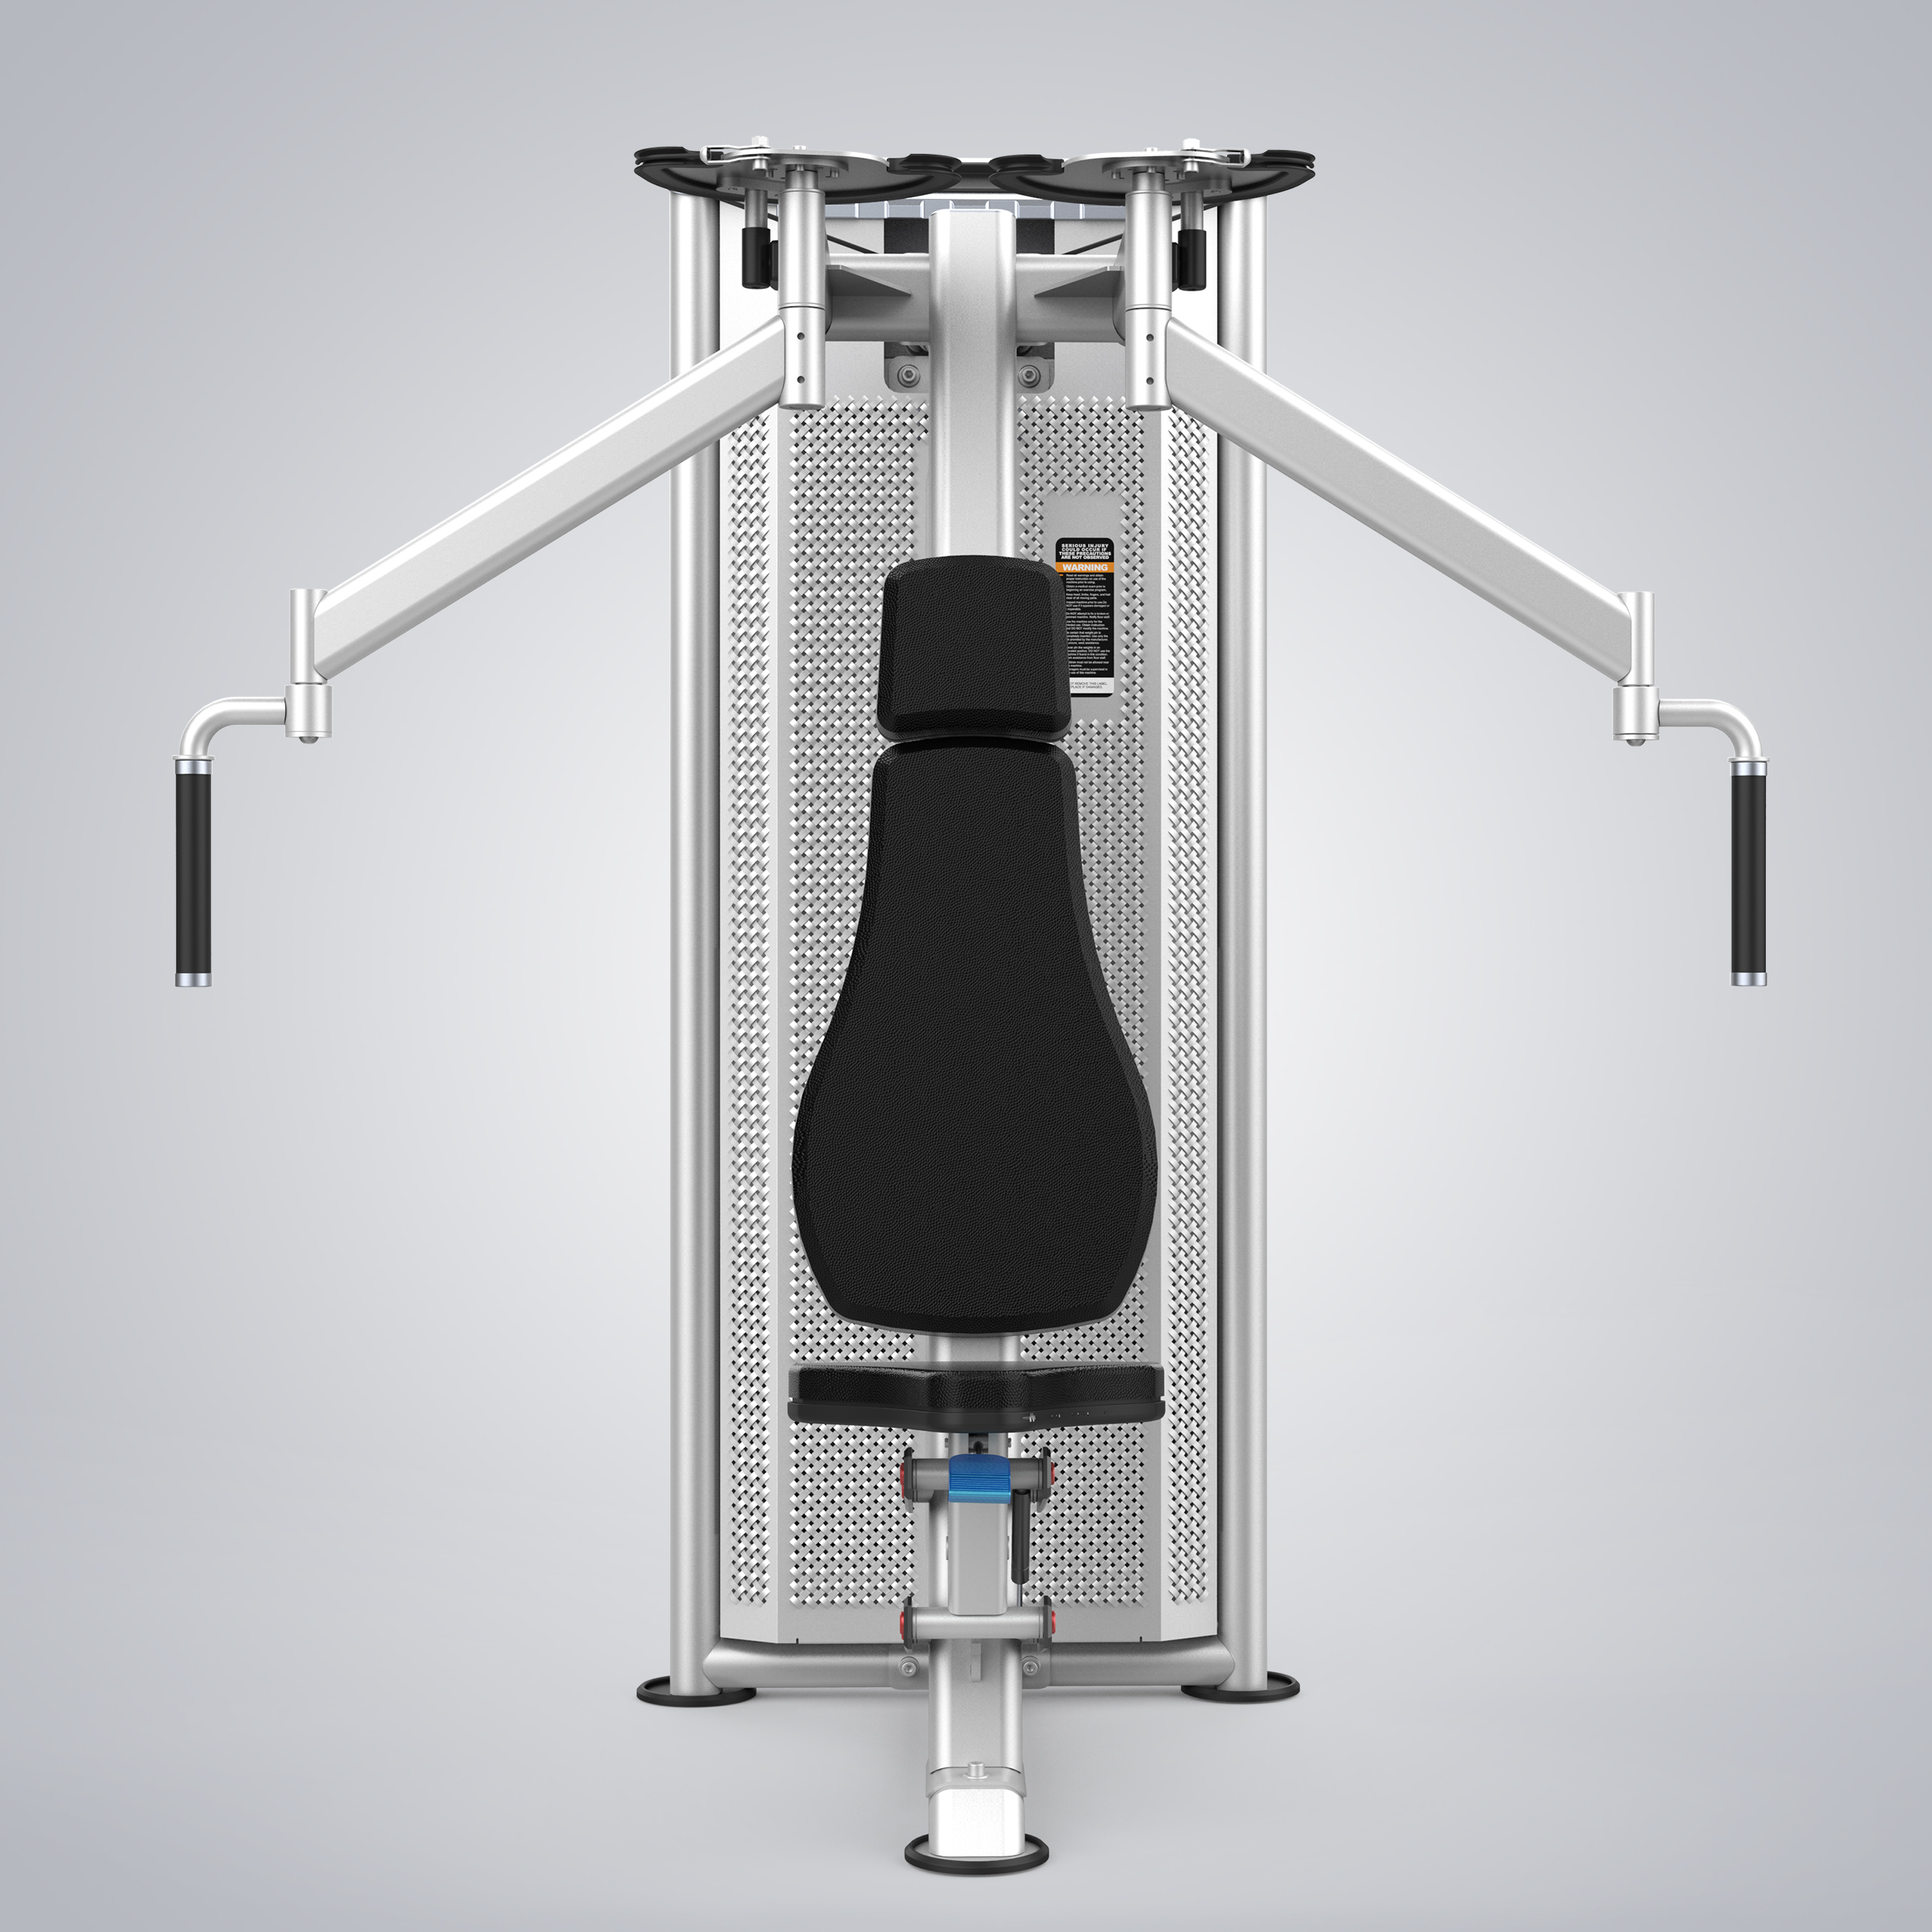 China U2004 Prestige Series Popular Gym Equipment Butterfly Shape Pec Fly Machine for Chest Workouts